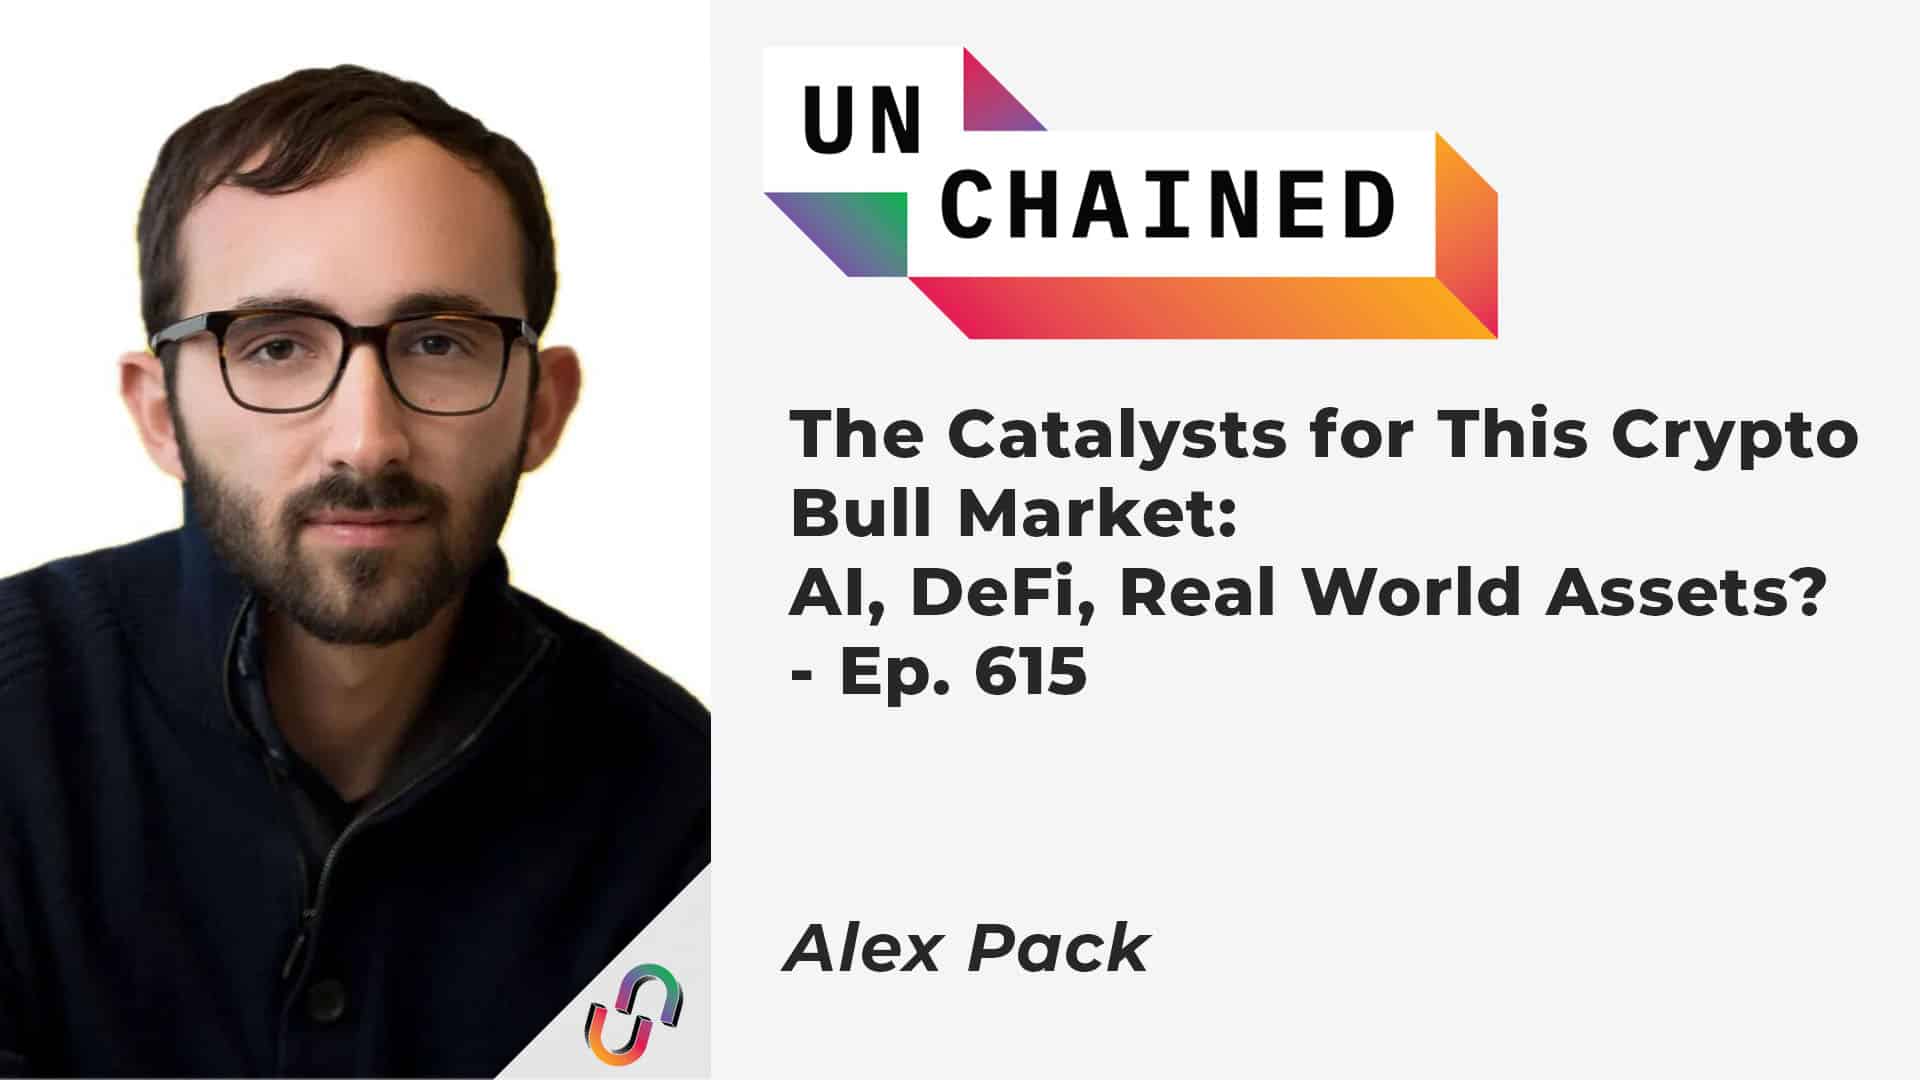 The Catalysts for This Crypto Bull Market: AI, DeFi, Real World Assets? - Ep. 615